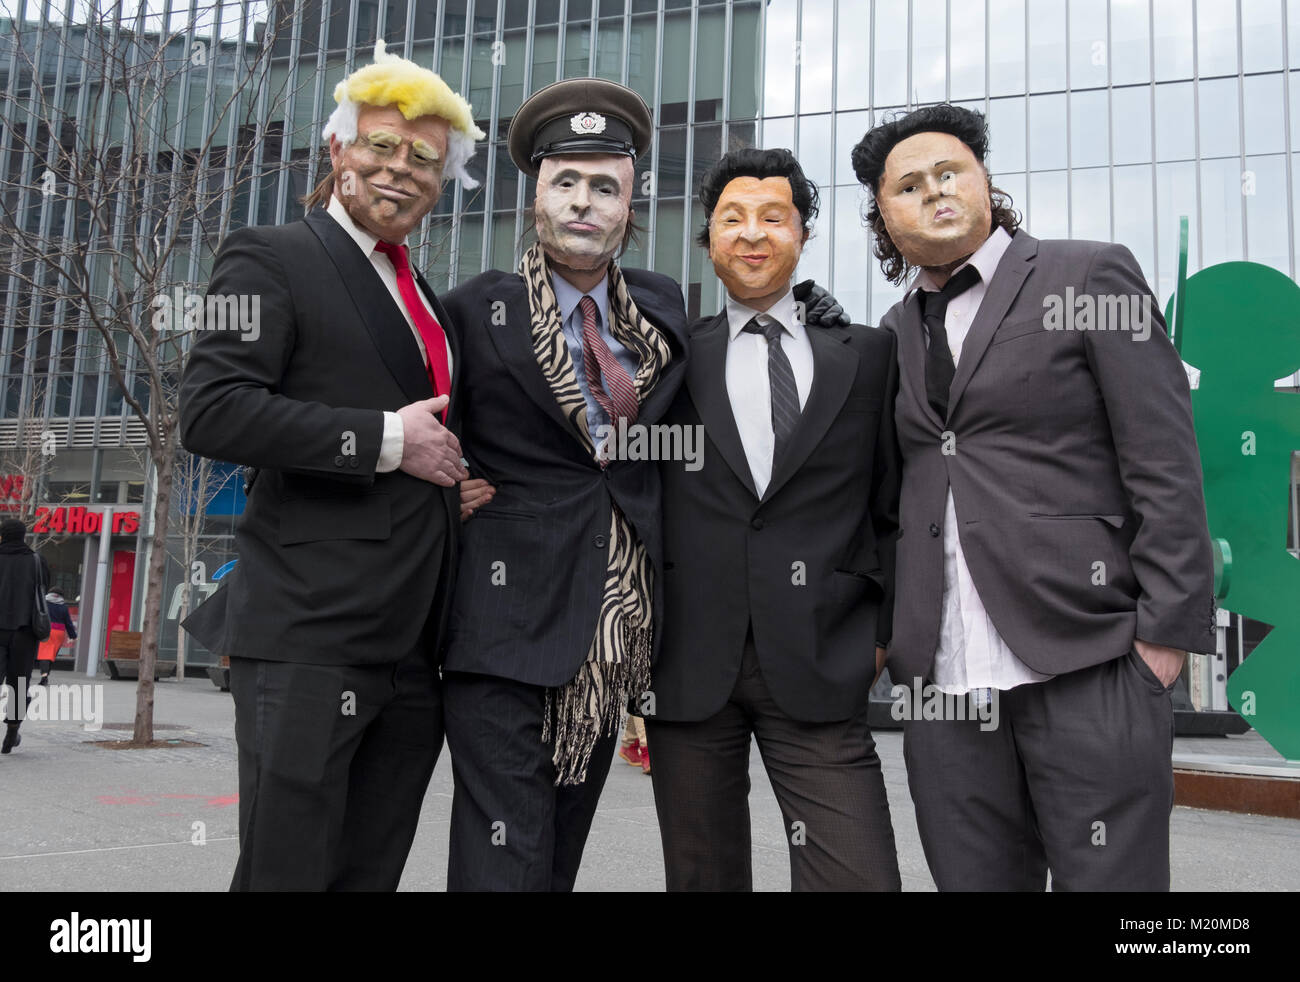 Members of the band Ultra in masks for a music video. They're dressed as  Donald Trump, Xi Jinpeng, Vladimir Putin & Kim Jong Un Stock Photo - Alamy